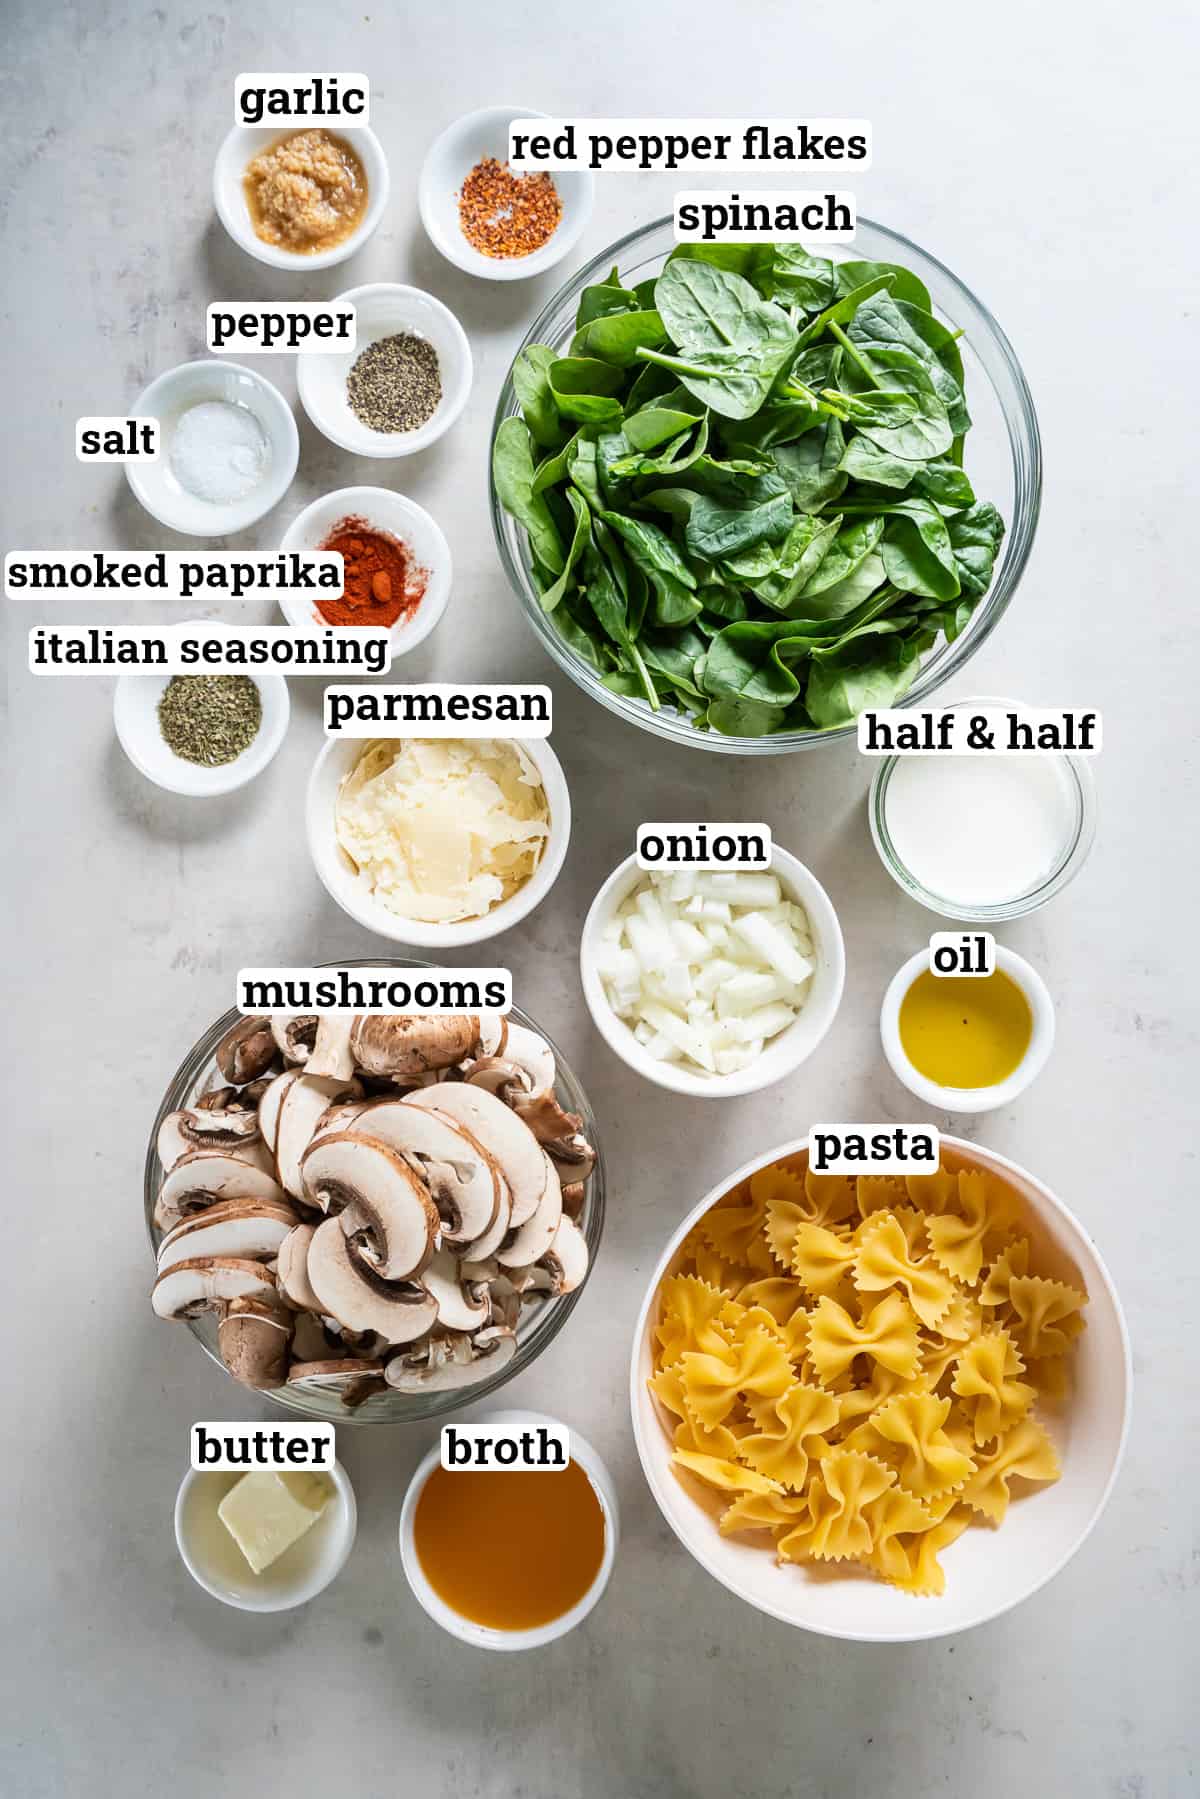 The ingredients for Mushroom Spinach Pasta with text.